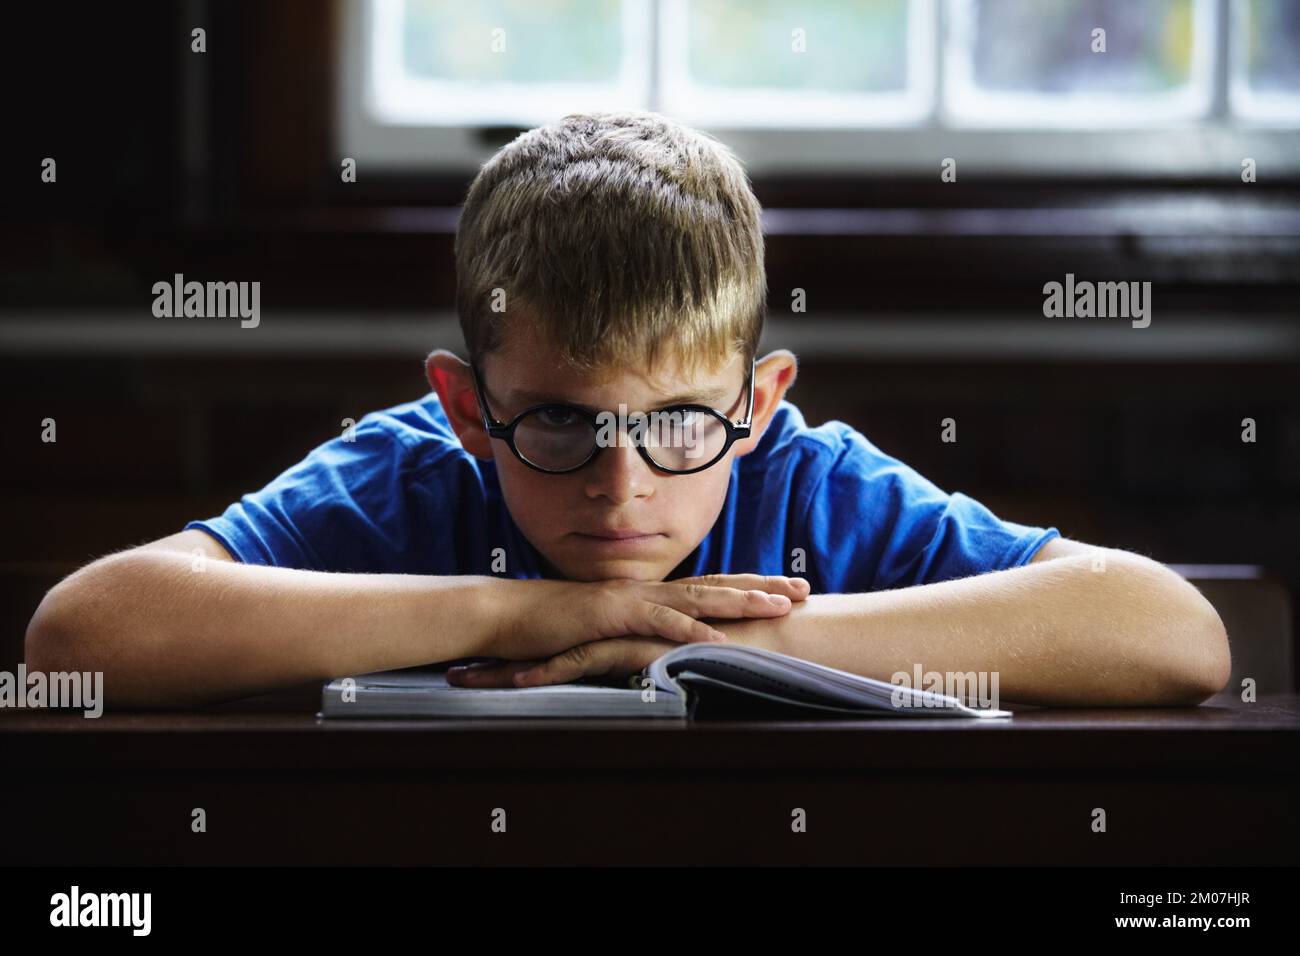 This work is boring. Young boy feeling overcome with boredom in the classroom. Stock Photo